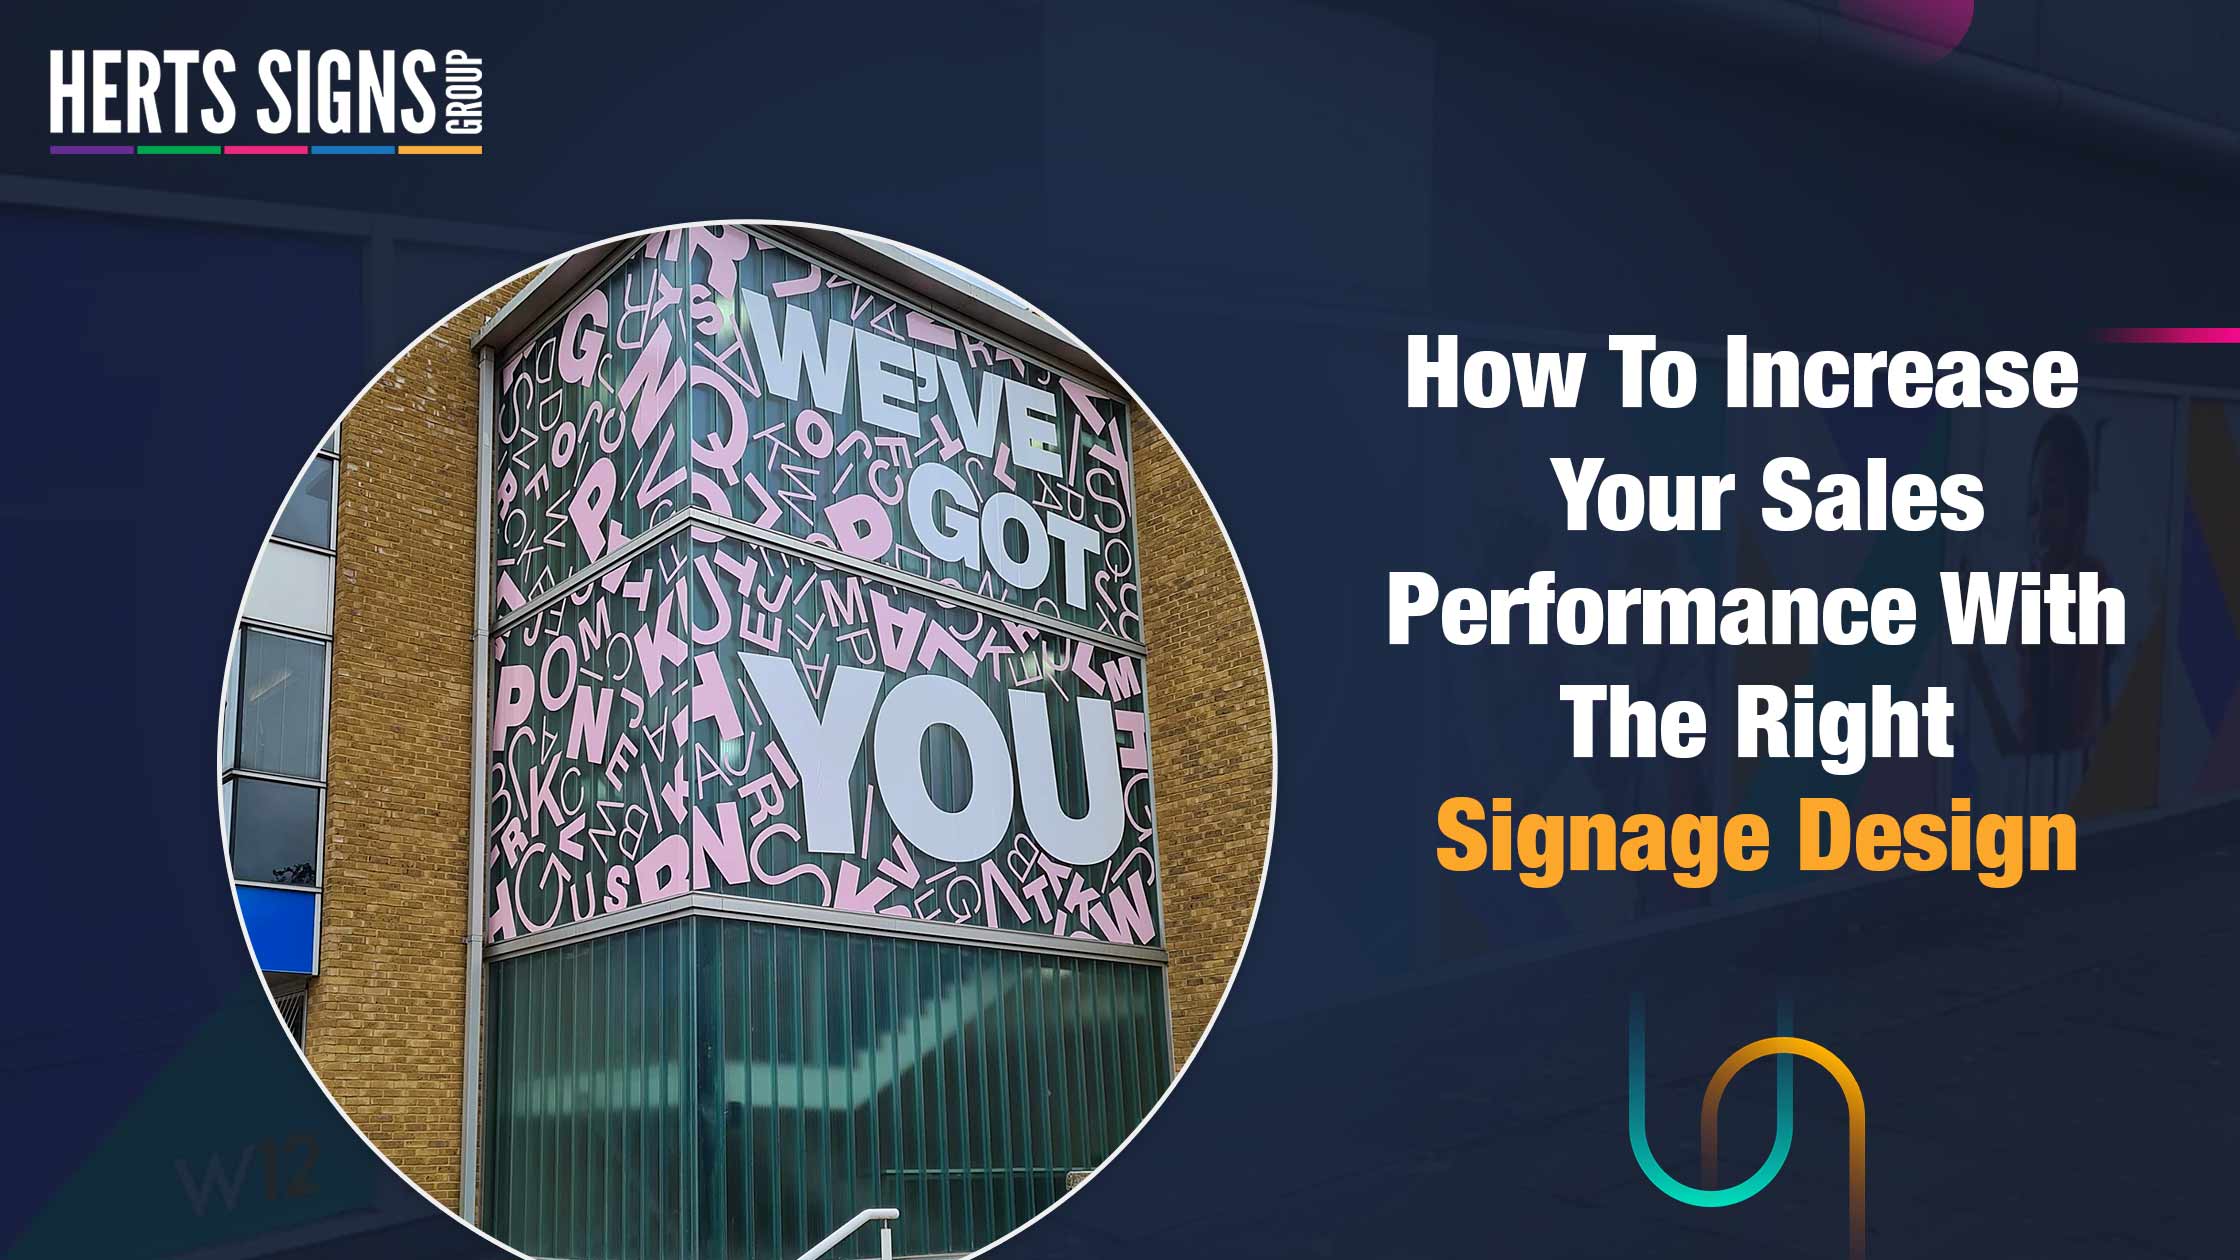 How To Increase Your Sales Performance With The Right Signage Design